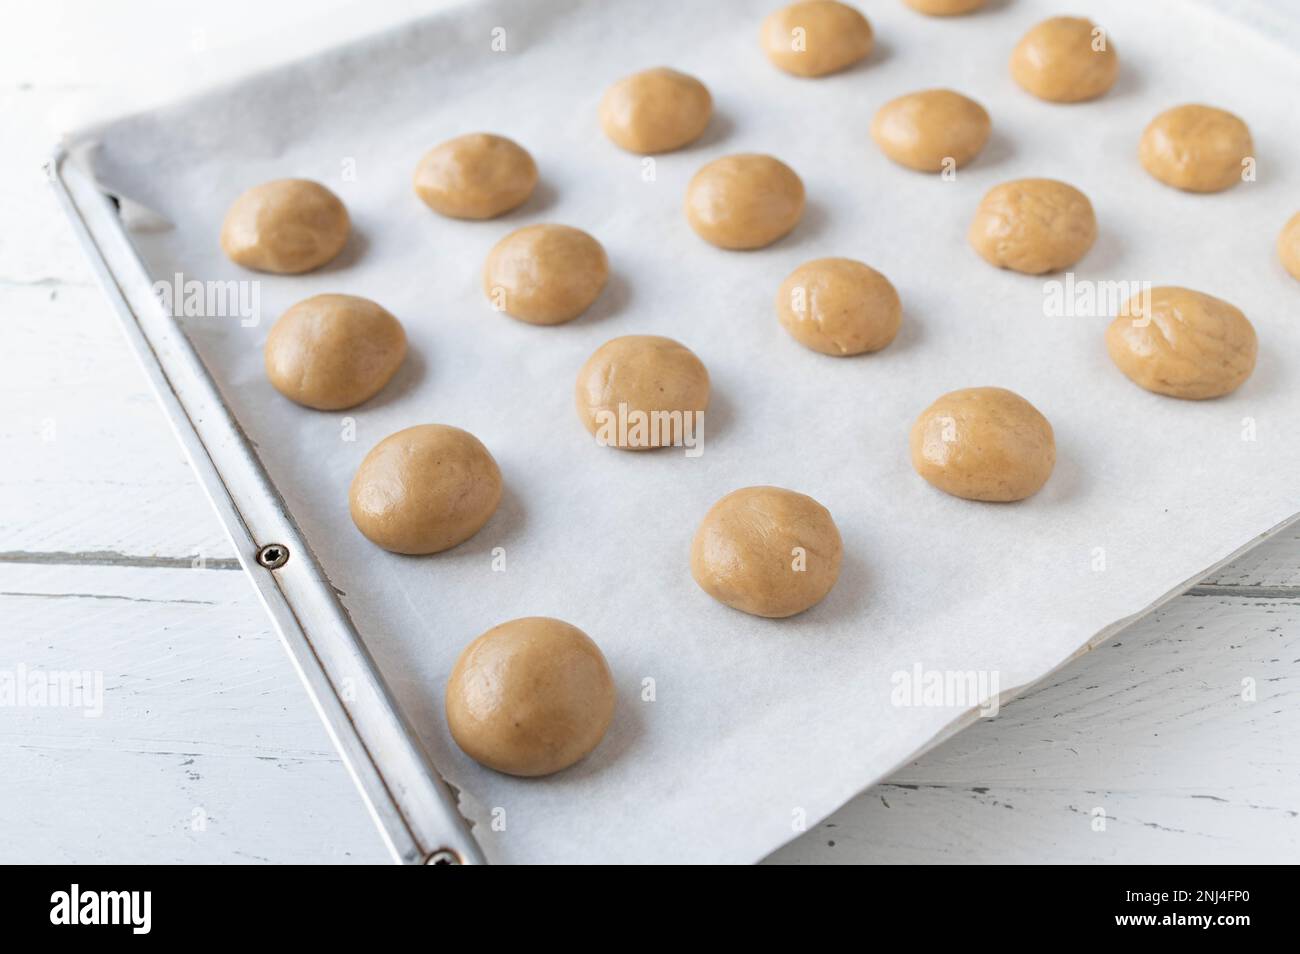 Raw and unbaked gingerbread cookies on a baking sheet Stock Photo